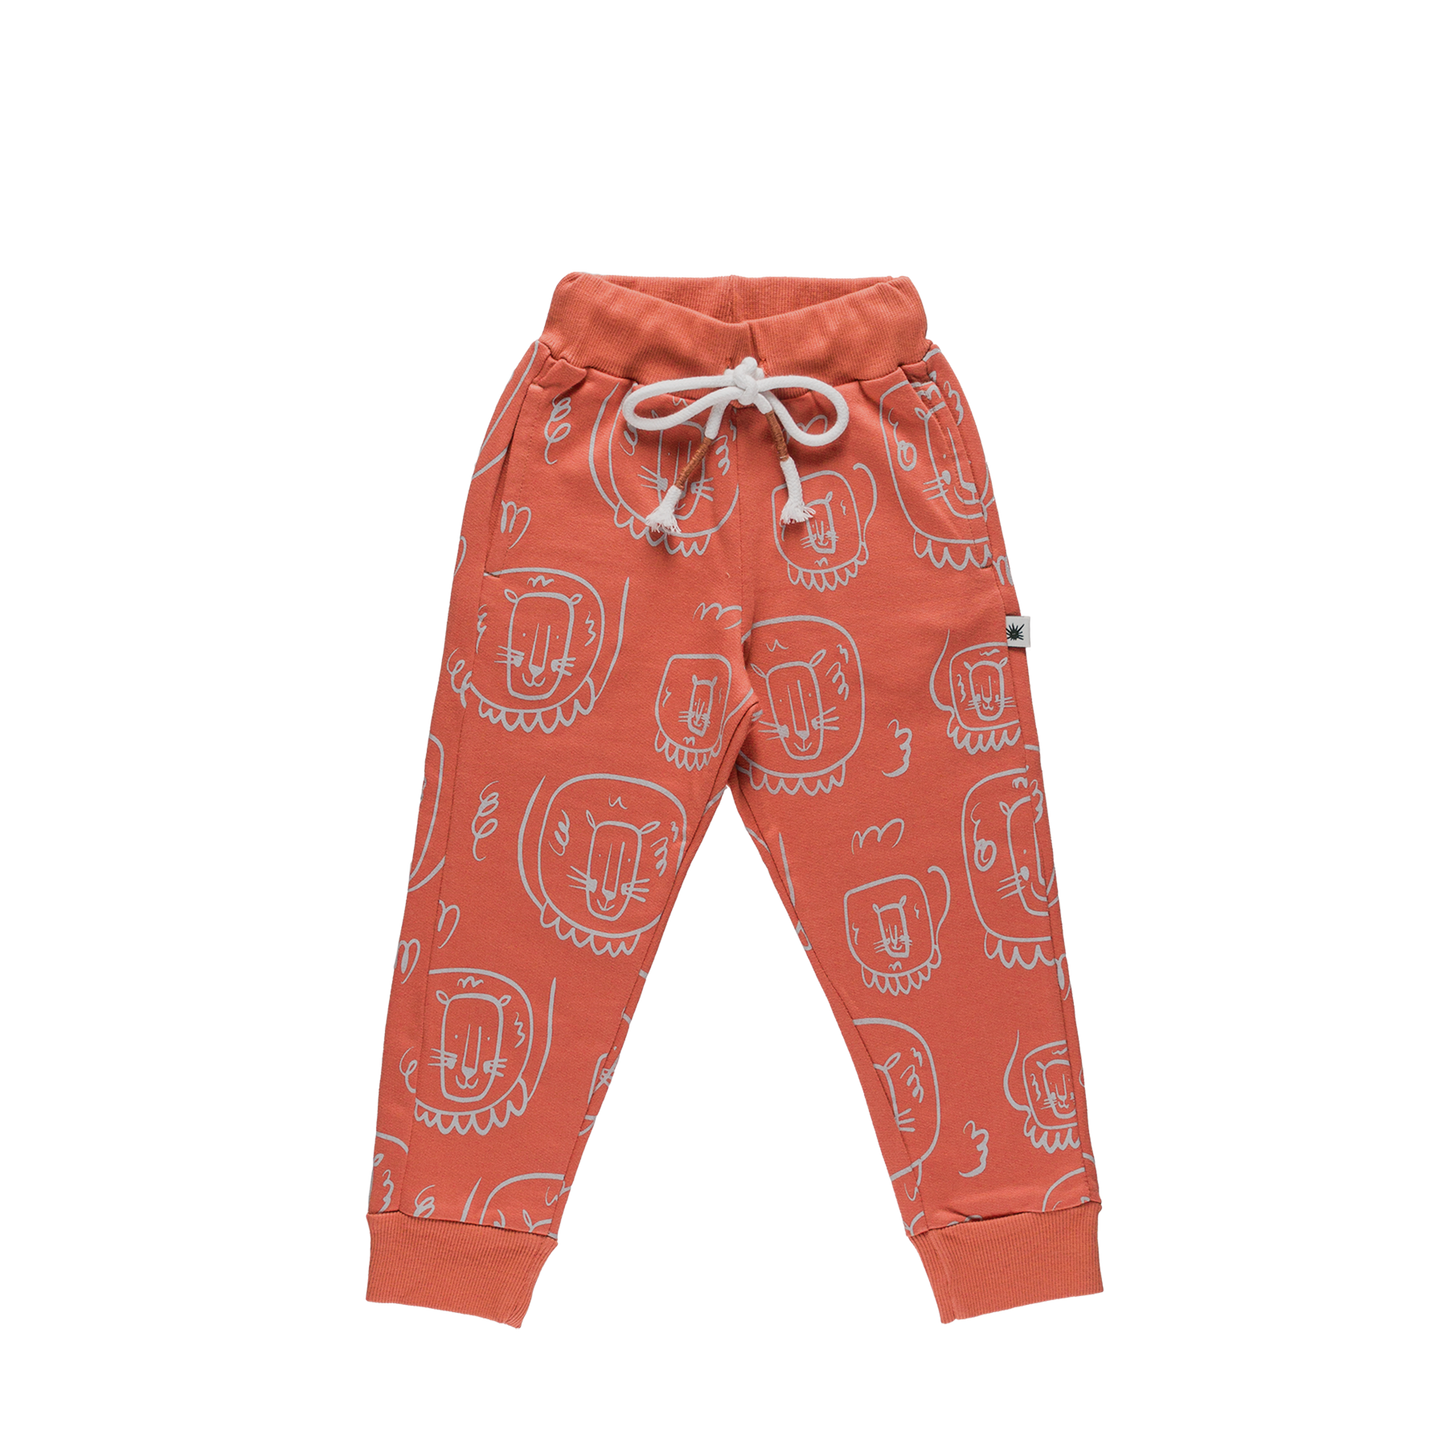 Organic "Jogger" Pants -Aged 6m to 5 Yrs- Colored Terracotta